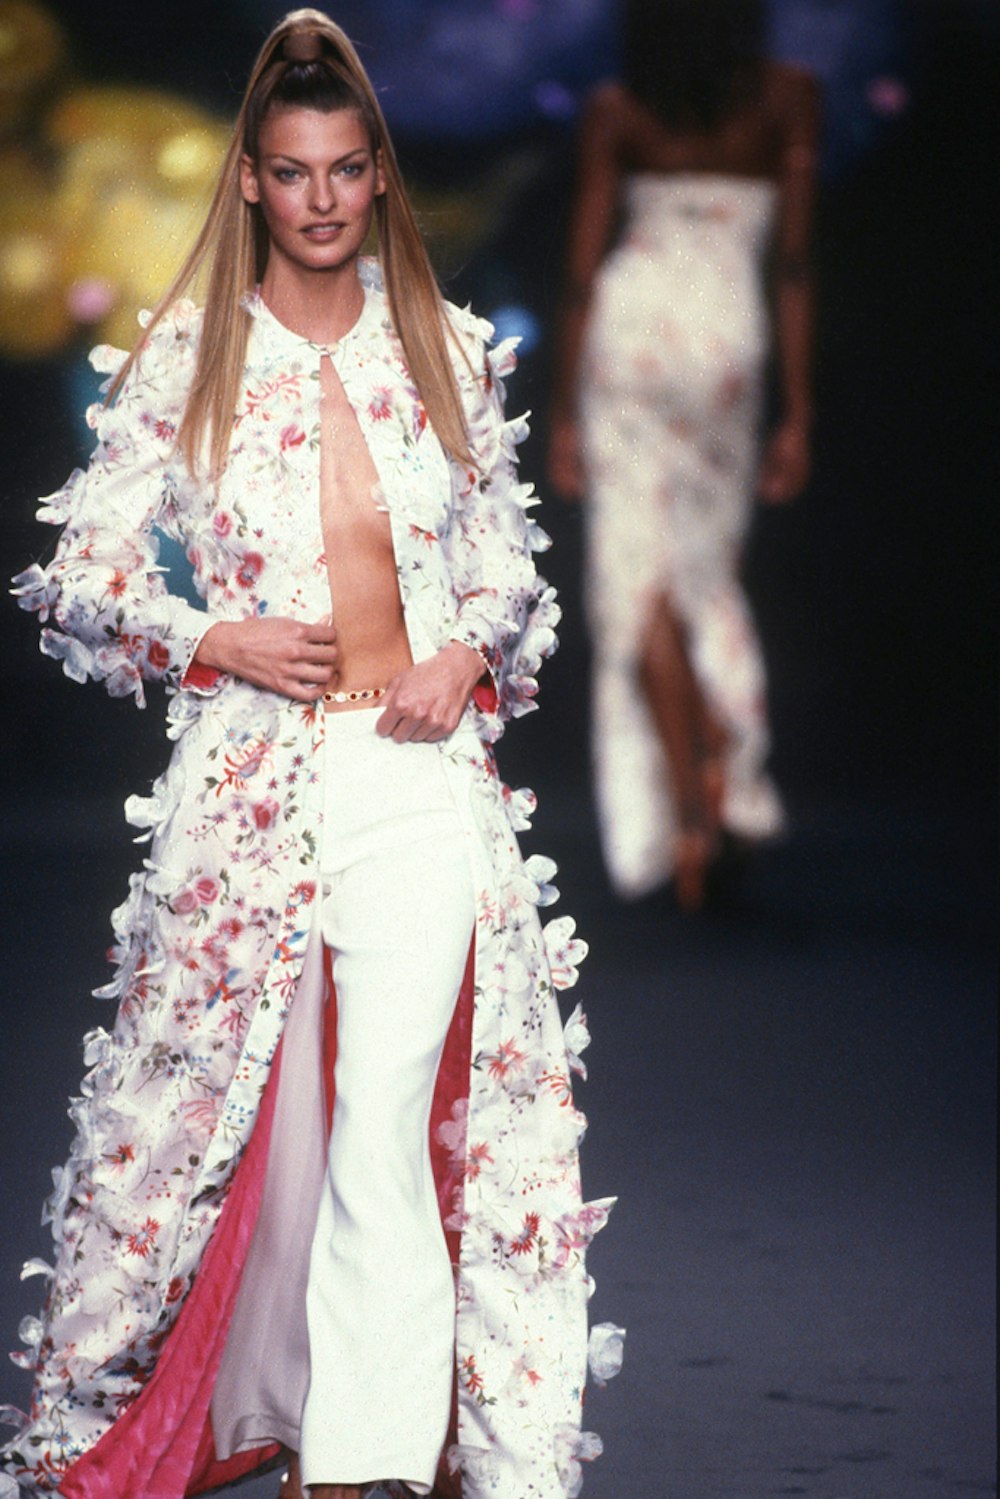 Never Forget Nostalgic Runway Shows - '90s 2000s Todd Oldham